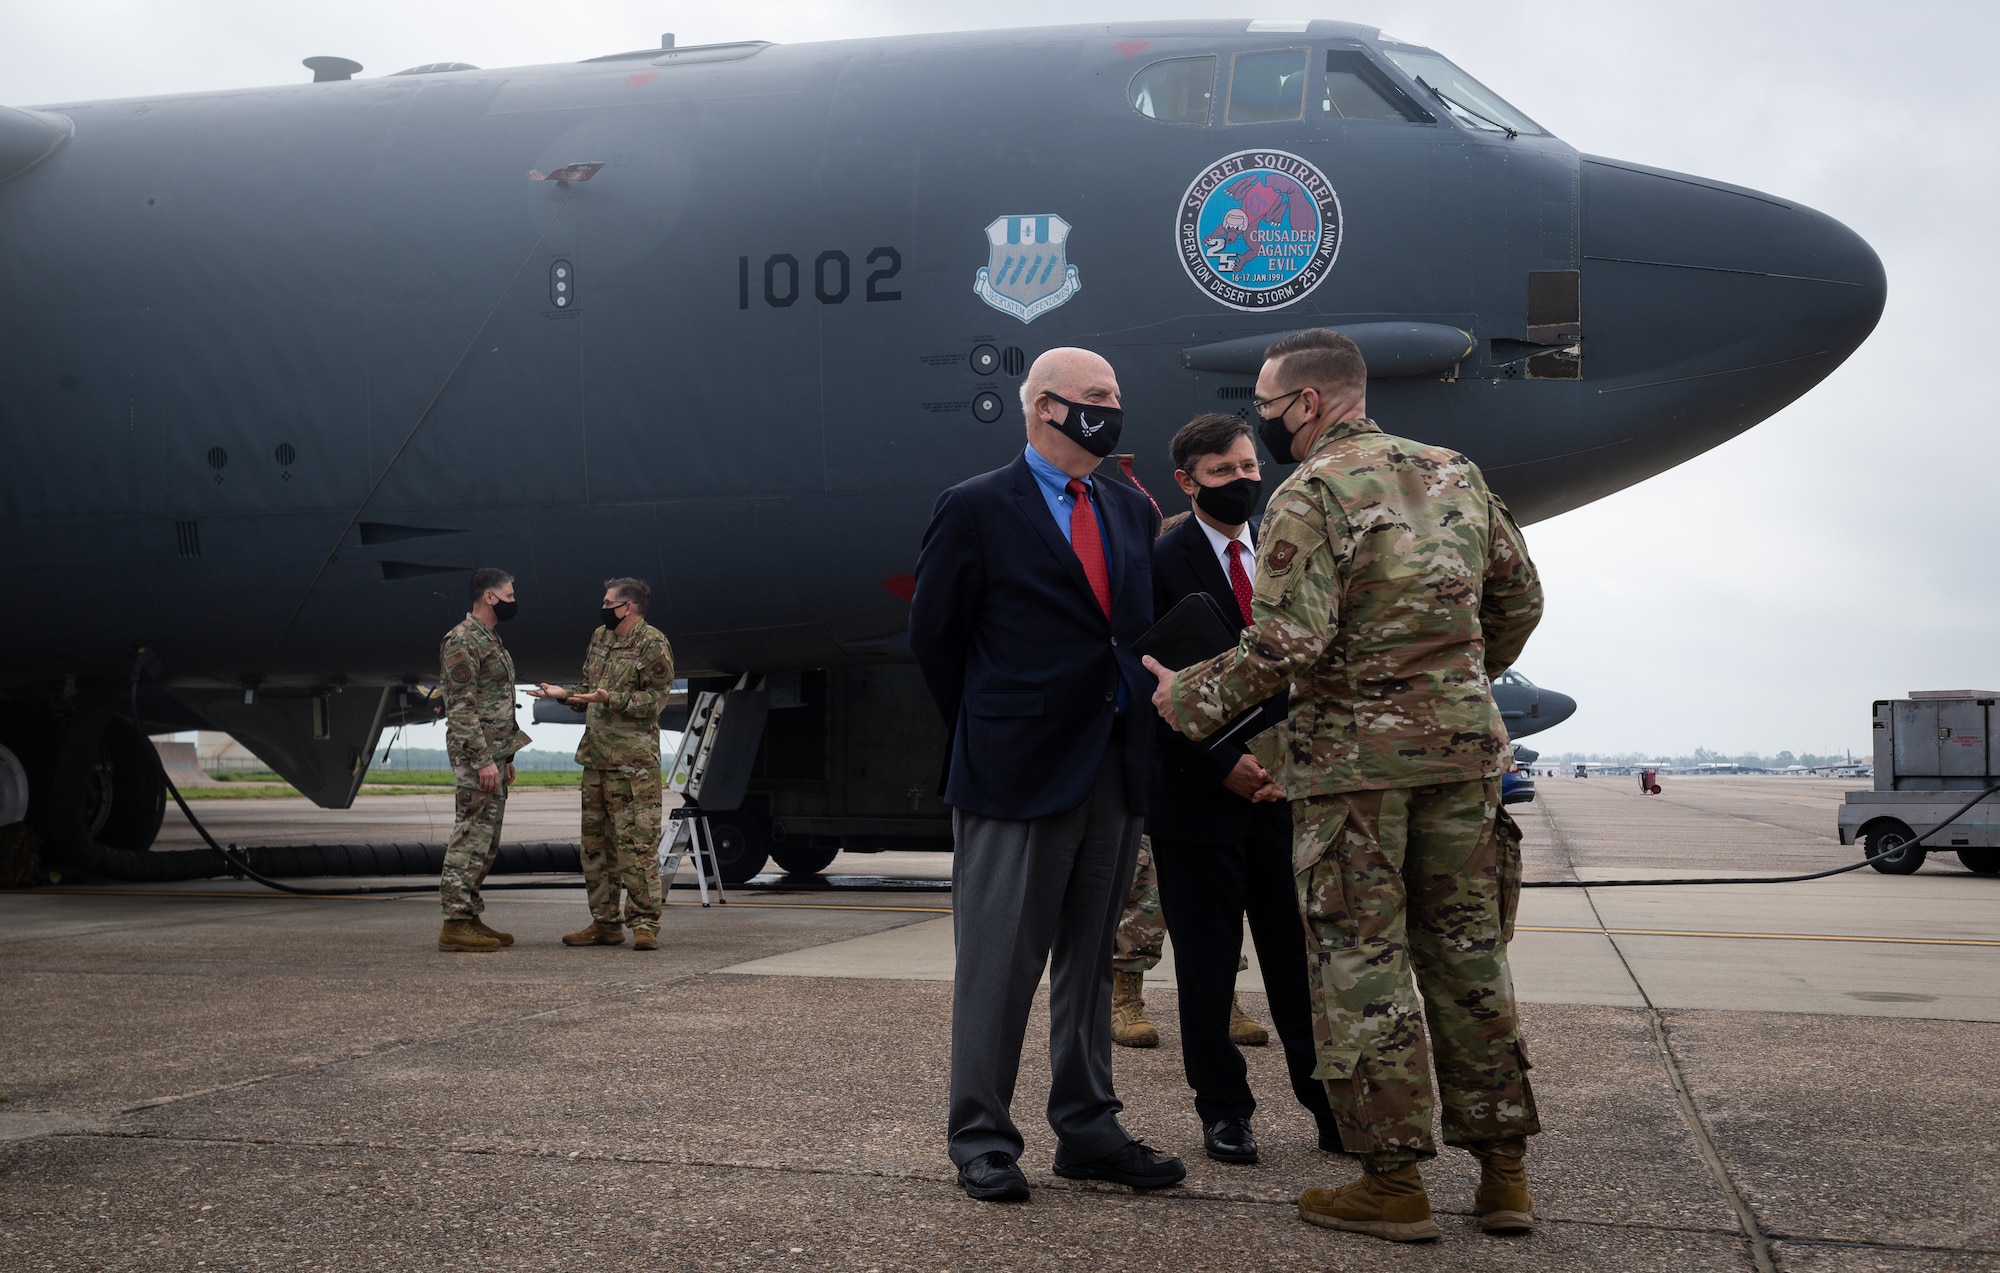 Rep. Mike Johnson, 4th Congressional District of Louisiana congressman, and Honorable John P. Roth, acting Secretary of the Air Force, are briefed by Chief Master Sgt. Brent T. Chadick, 2nd Bomb Wing command chief, during a tour at Barksdale Air Force Base, Louisiana, April 6, 2021. Regardless of the uncertainties or changes the world brings, the 2nd Bomb Wing is a loyal defender of the national security objectives. (U.S. Air Force photo by Senior Airman Max Miller)